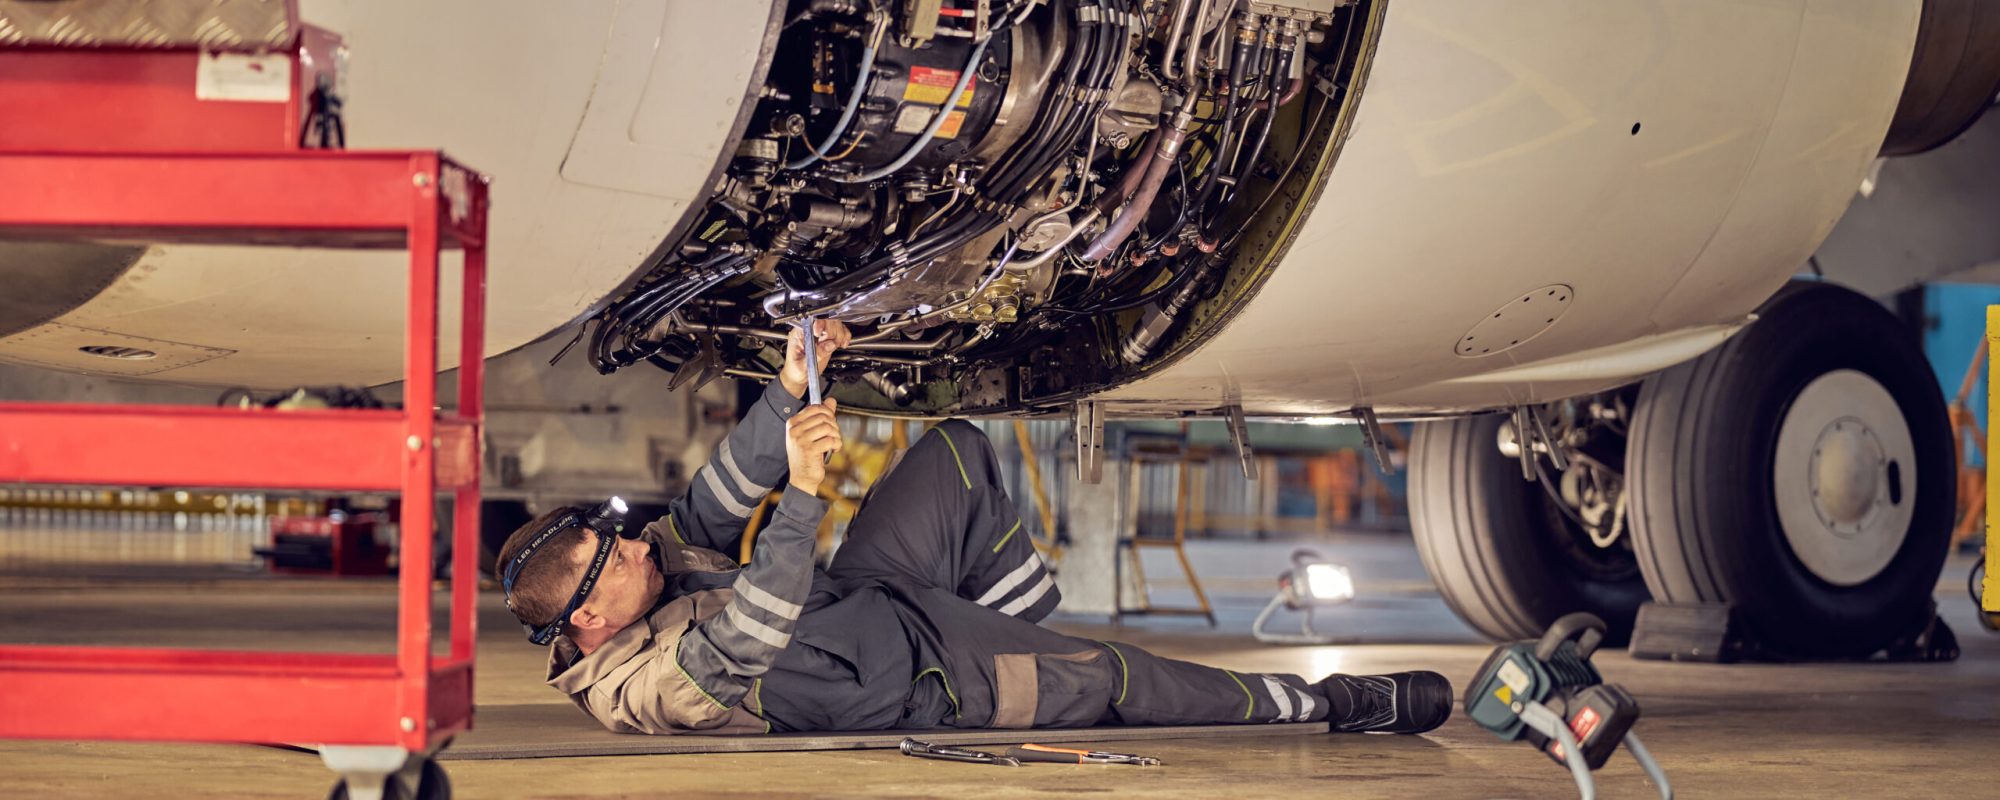 Side view portrait of airplane maintenance mechanic inspecting and tuning plane engine in a hangar